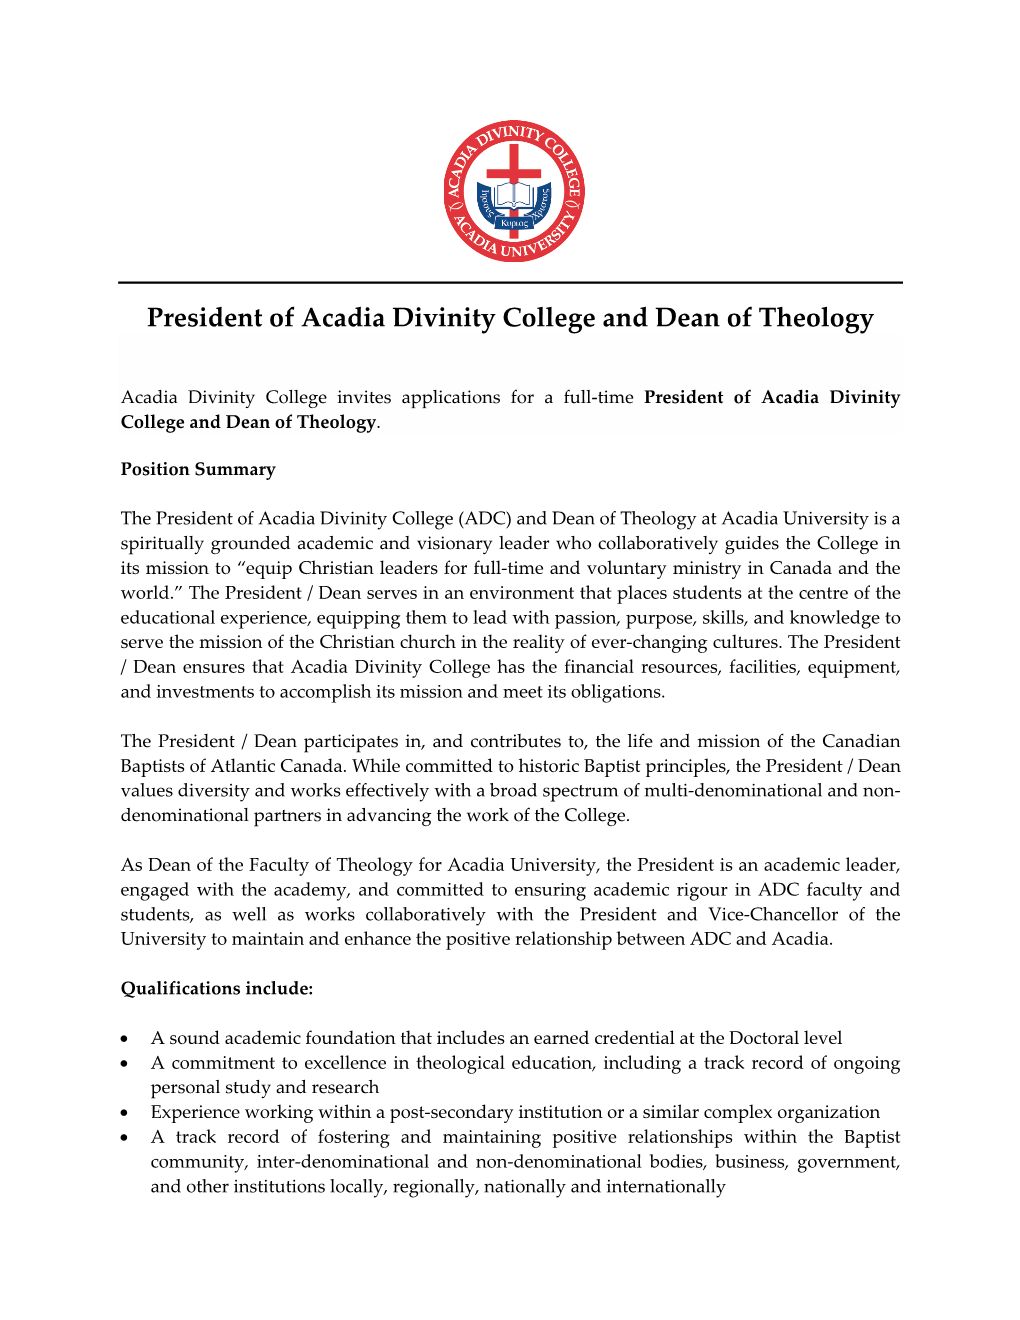 President of Acadia Divinity College and Dean of Theology